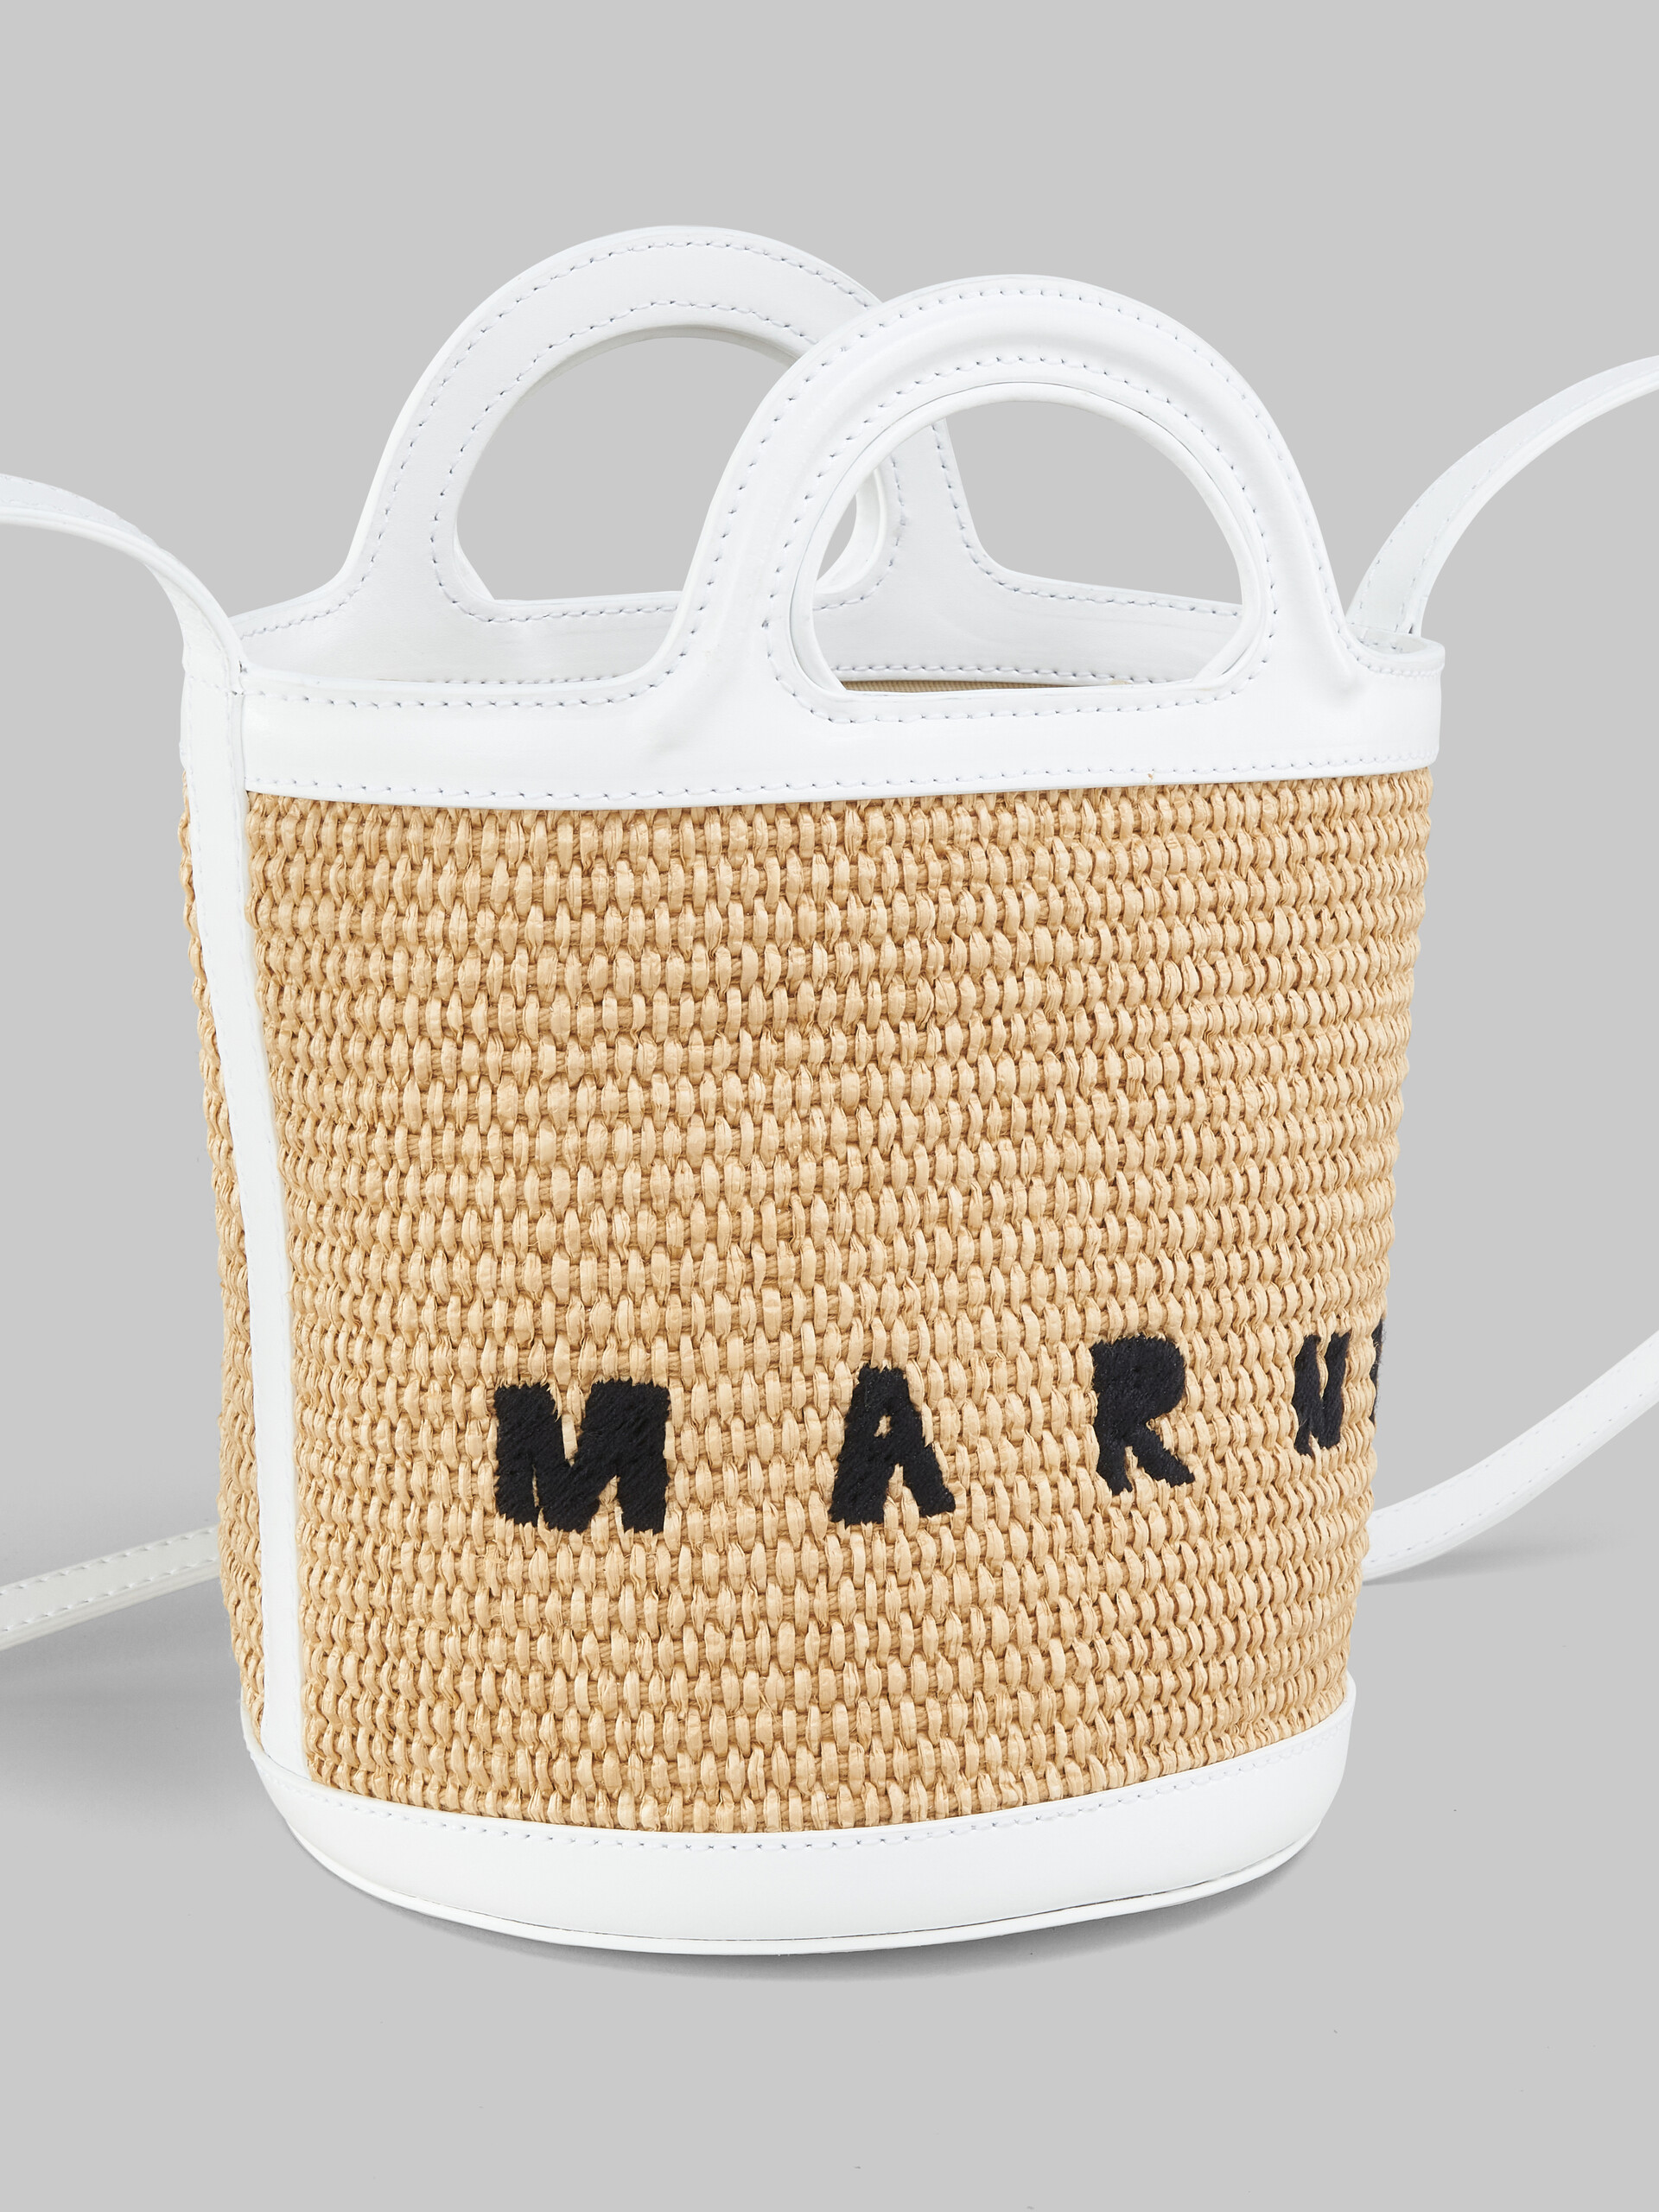 Tropicalia Small Bucket Bag in white leather and raffia-effect 